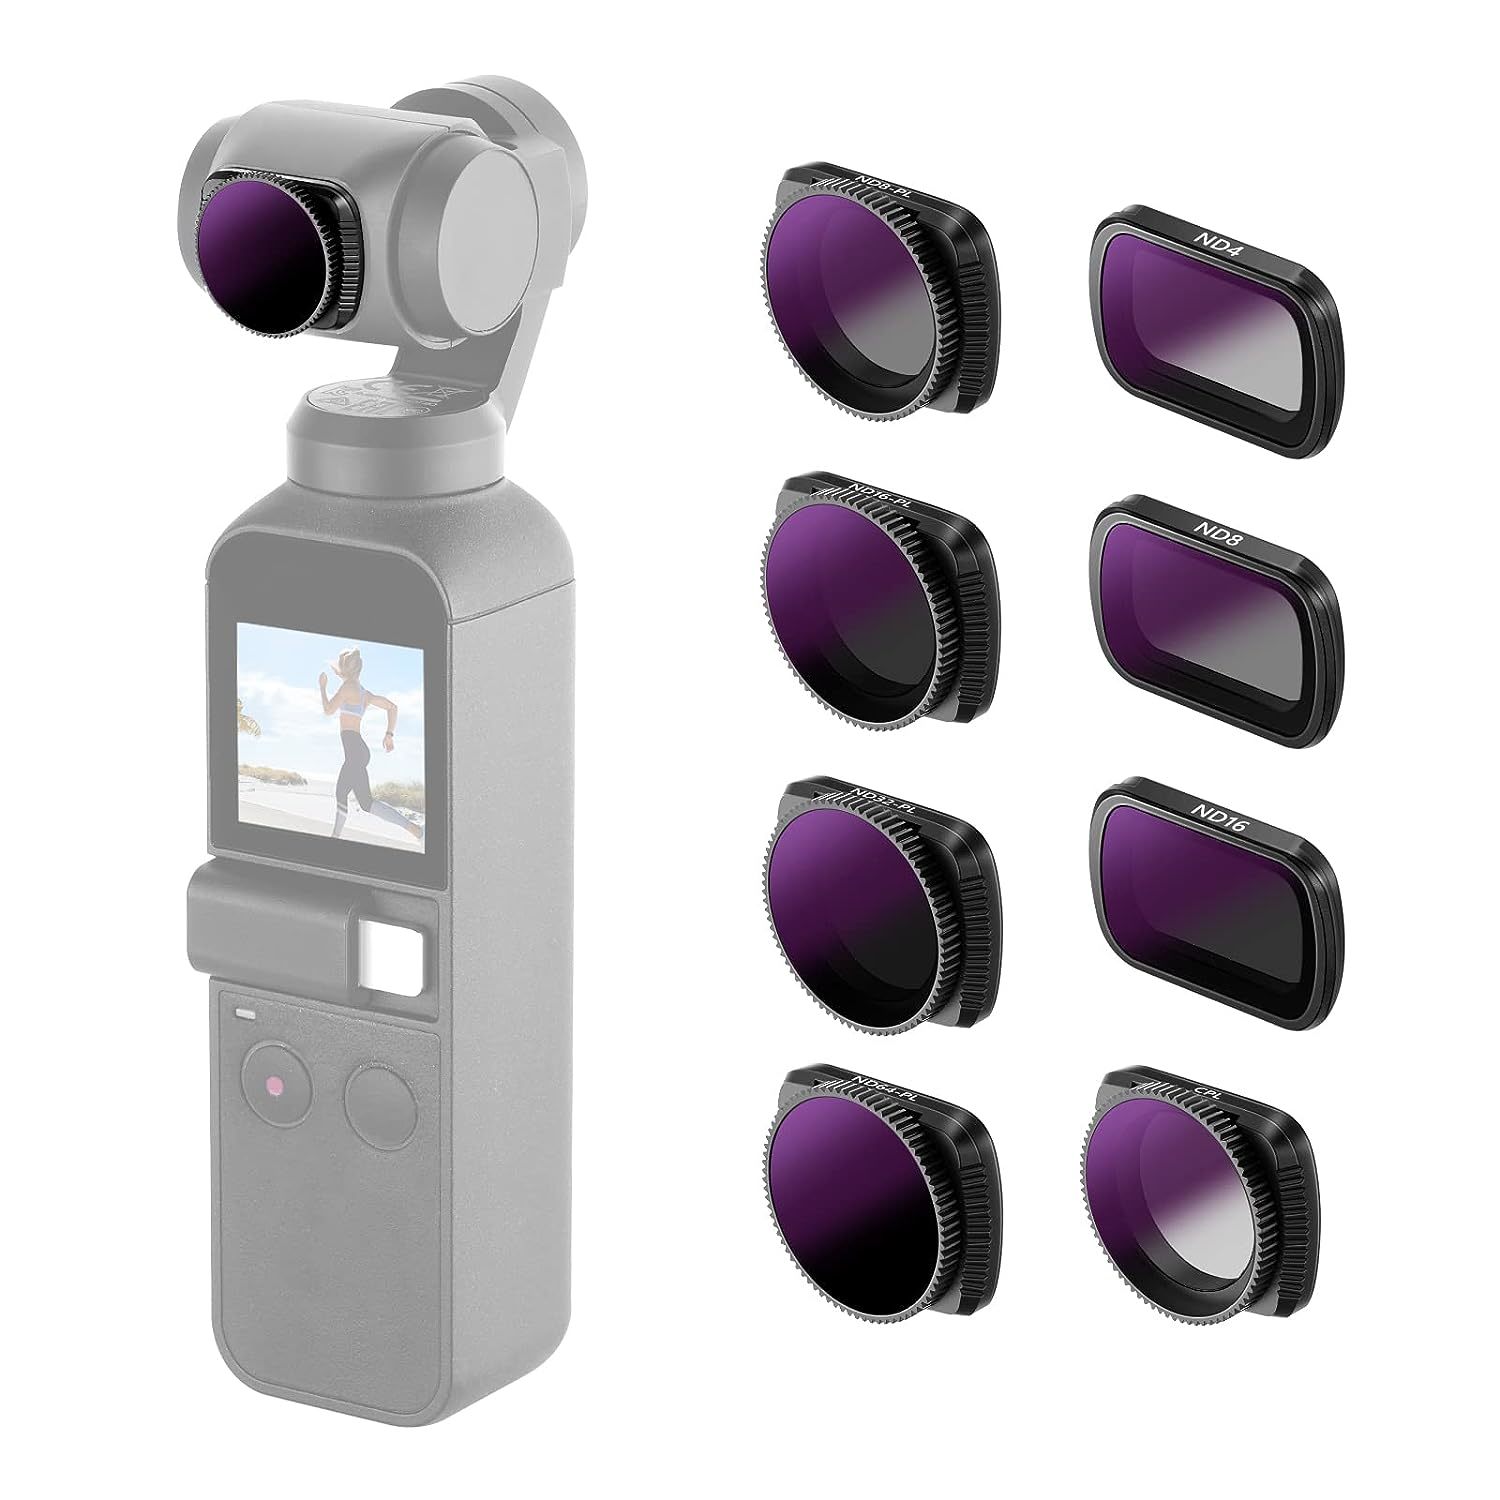 Neewer Magnetic Lens Filter Kit Compatible with DJI Osmo Pocket Camera - 8 Piece - $89.99